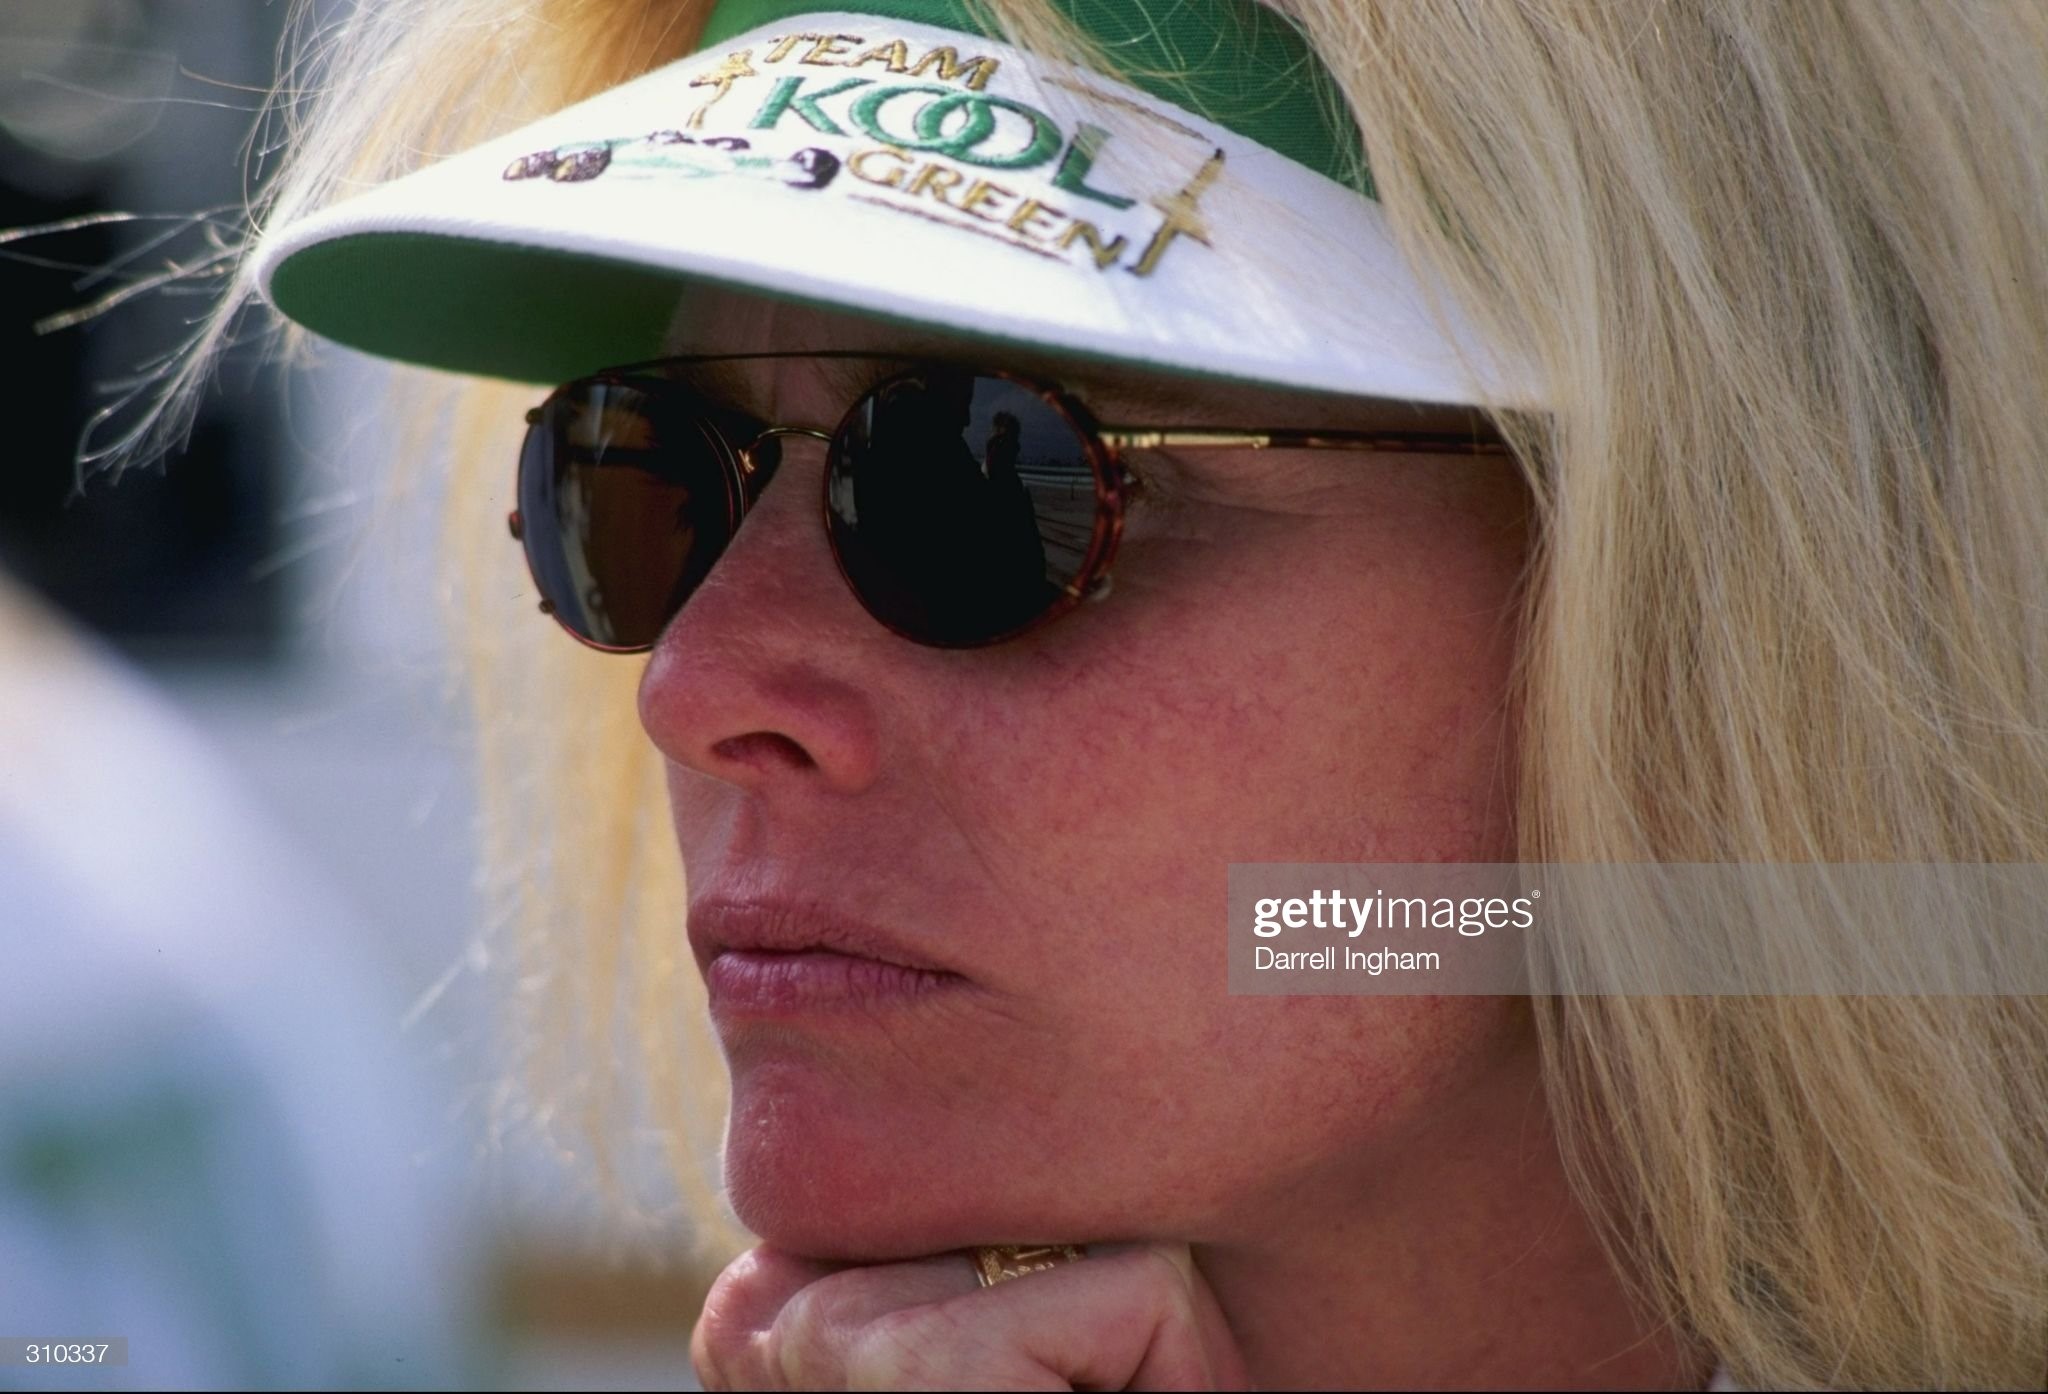 Carol Wilkins looks on during the Grand Prix of Miami at the Miami-Dade Motorsports Complex in Homestead, Florida, on March 14, 1998. 